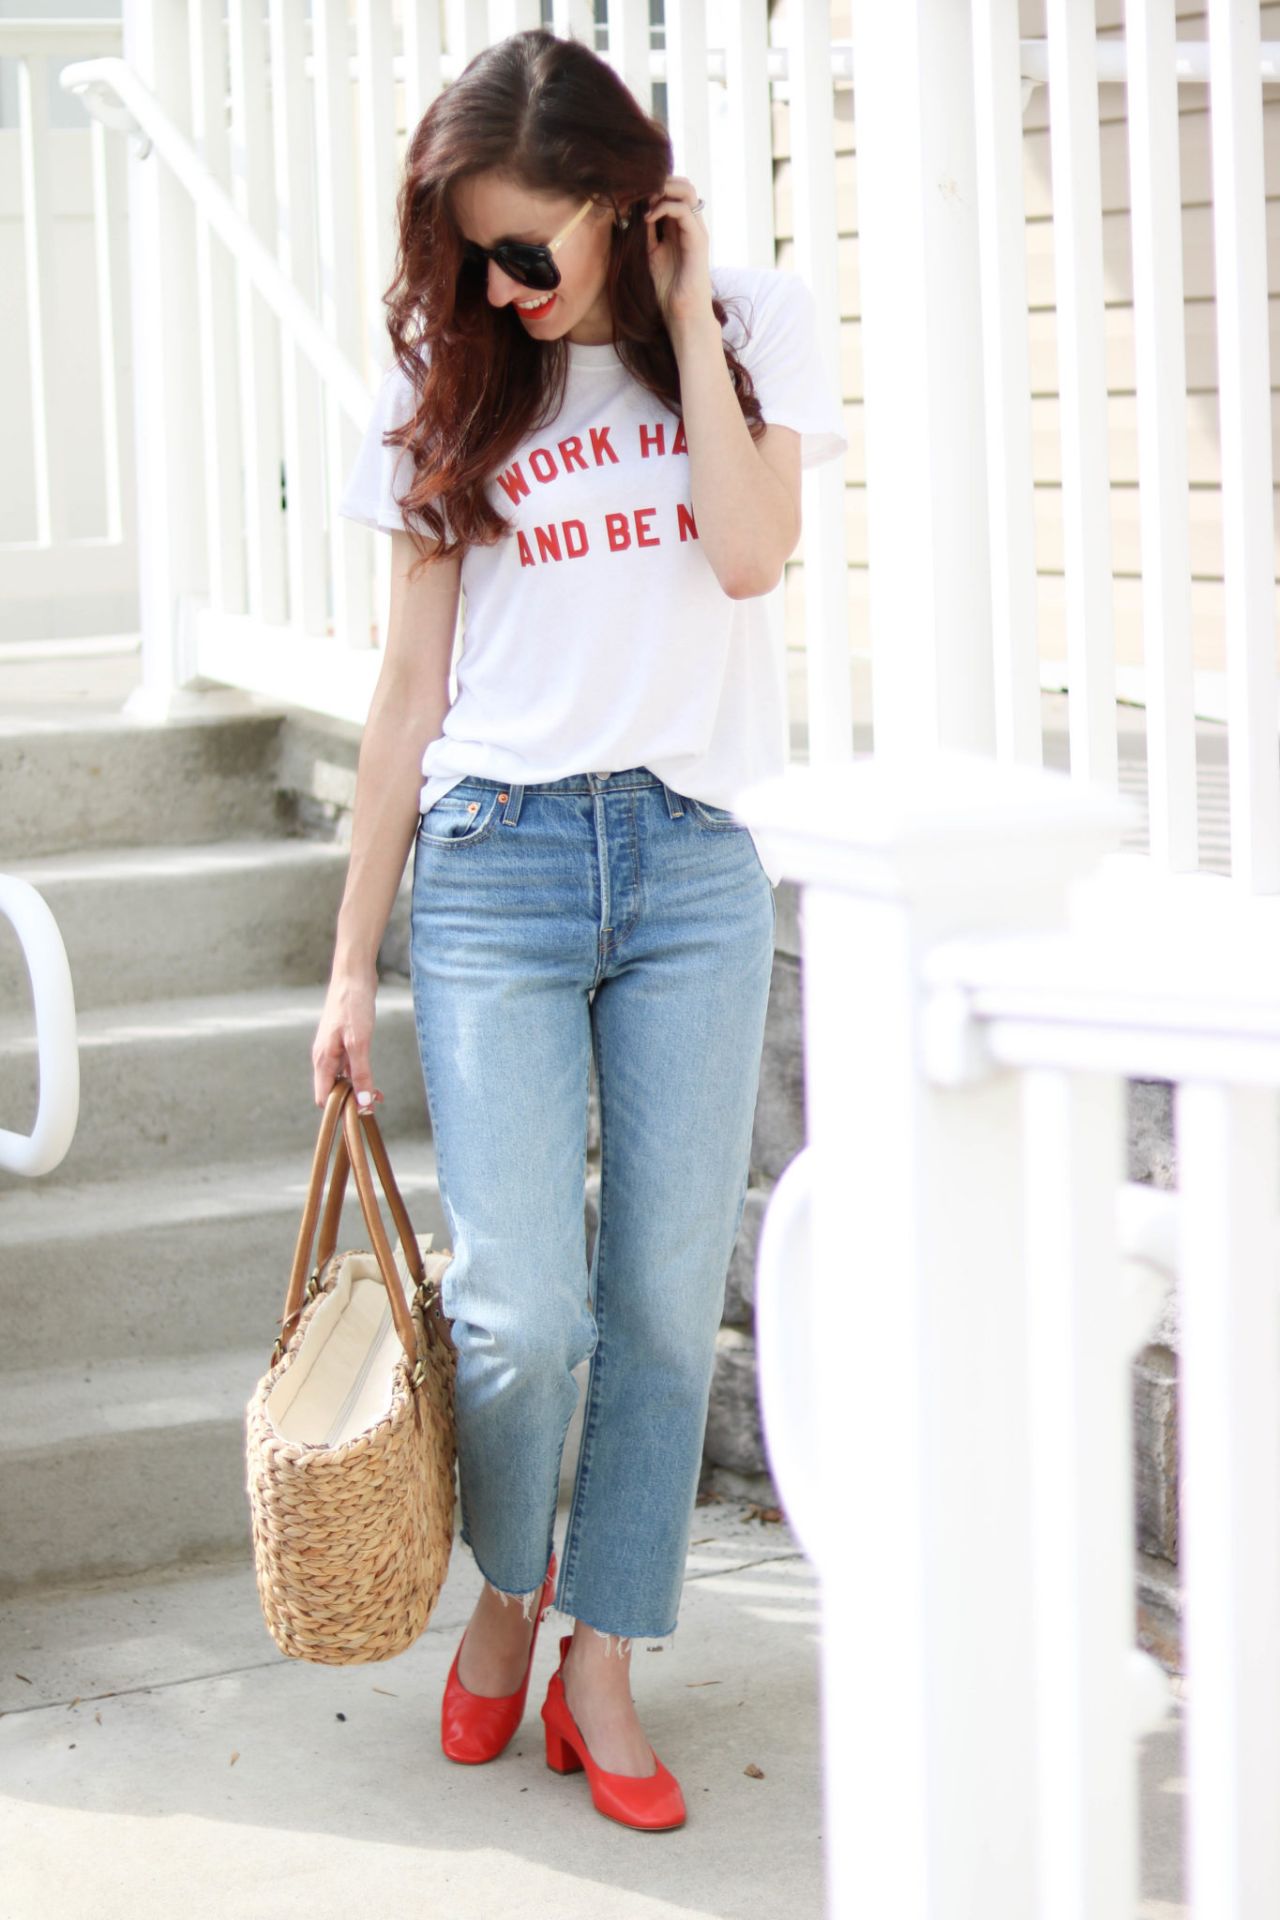 Best Jeans UNDER $100 - The best jeans on a budget!